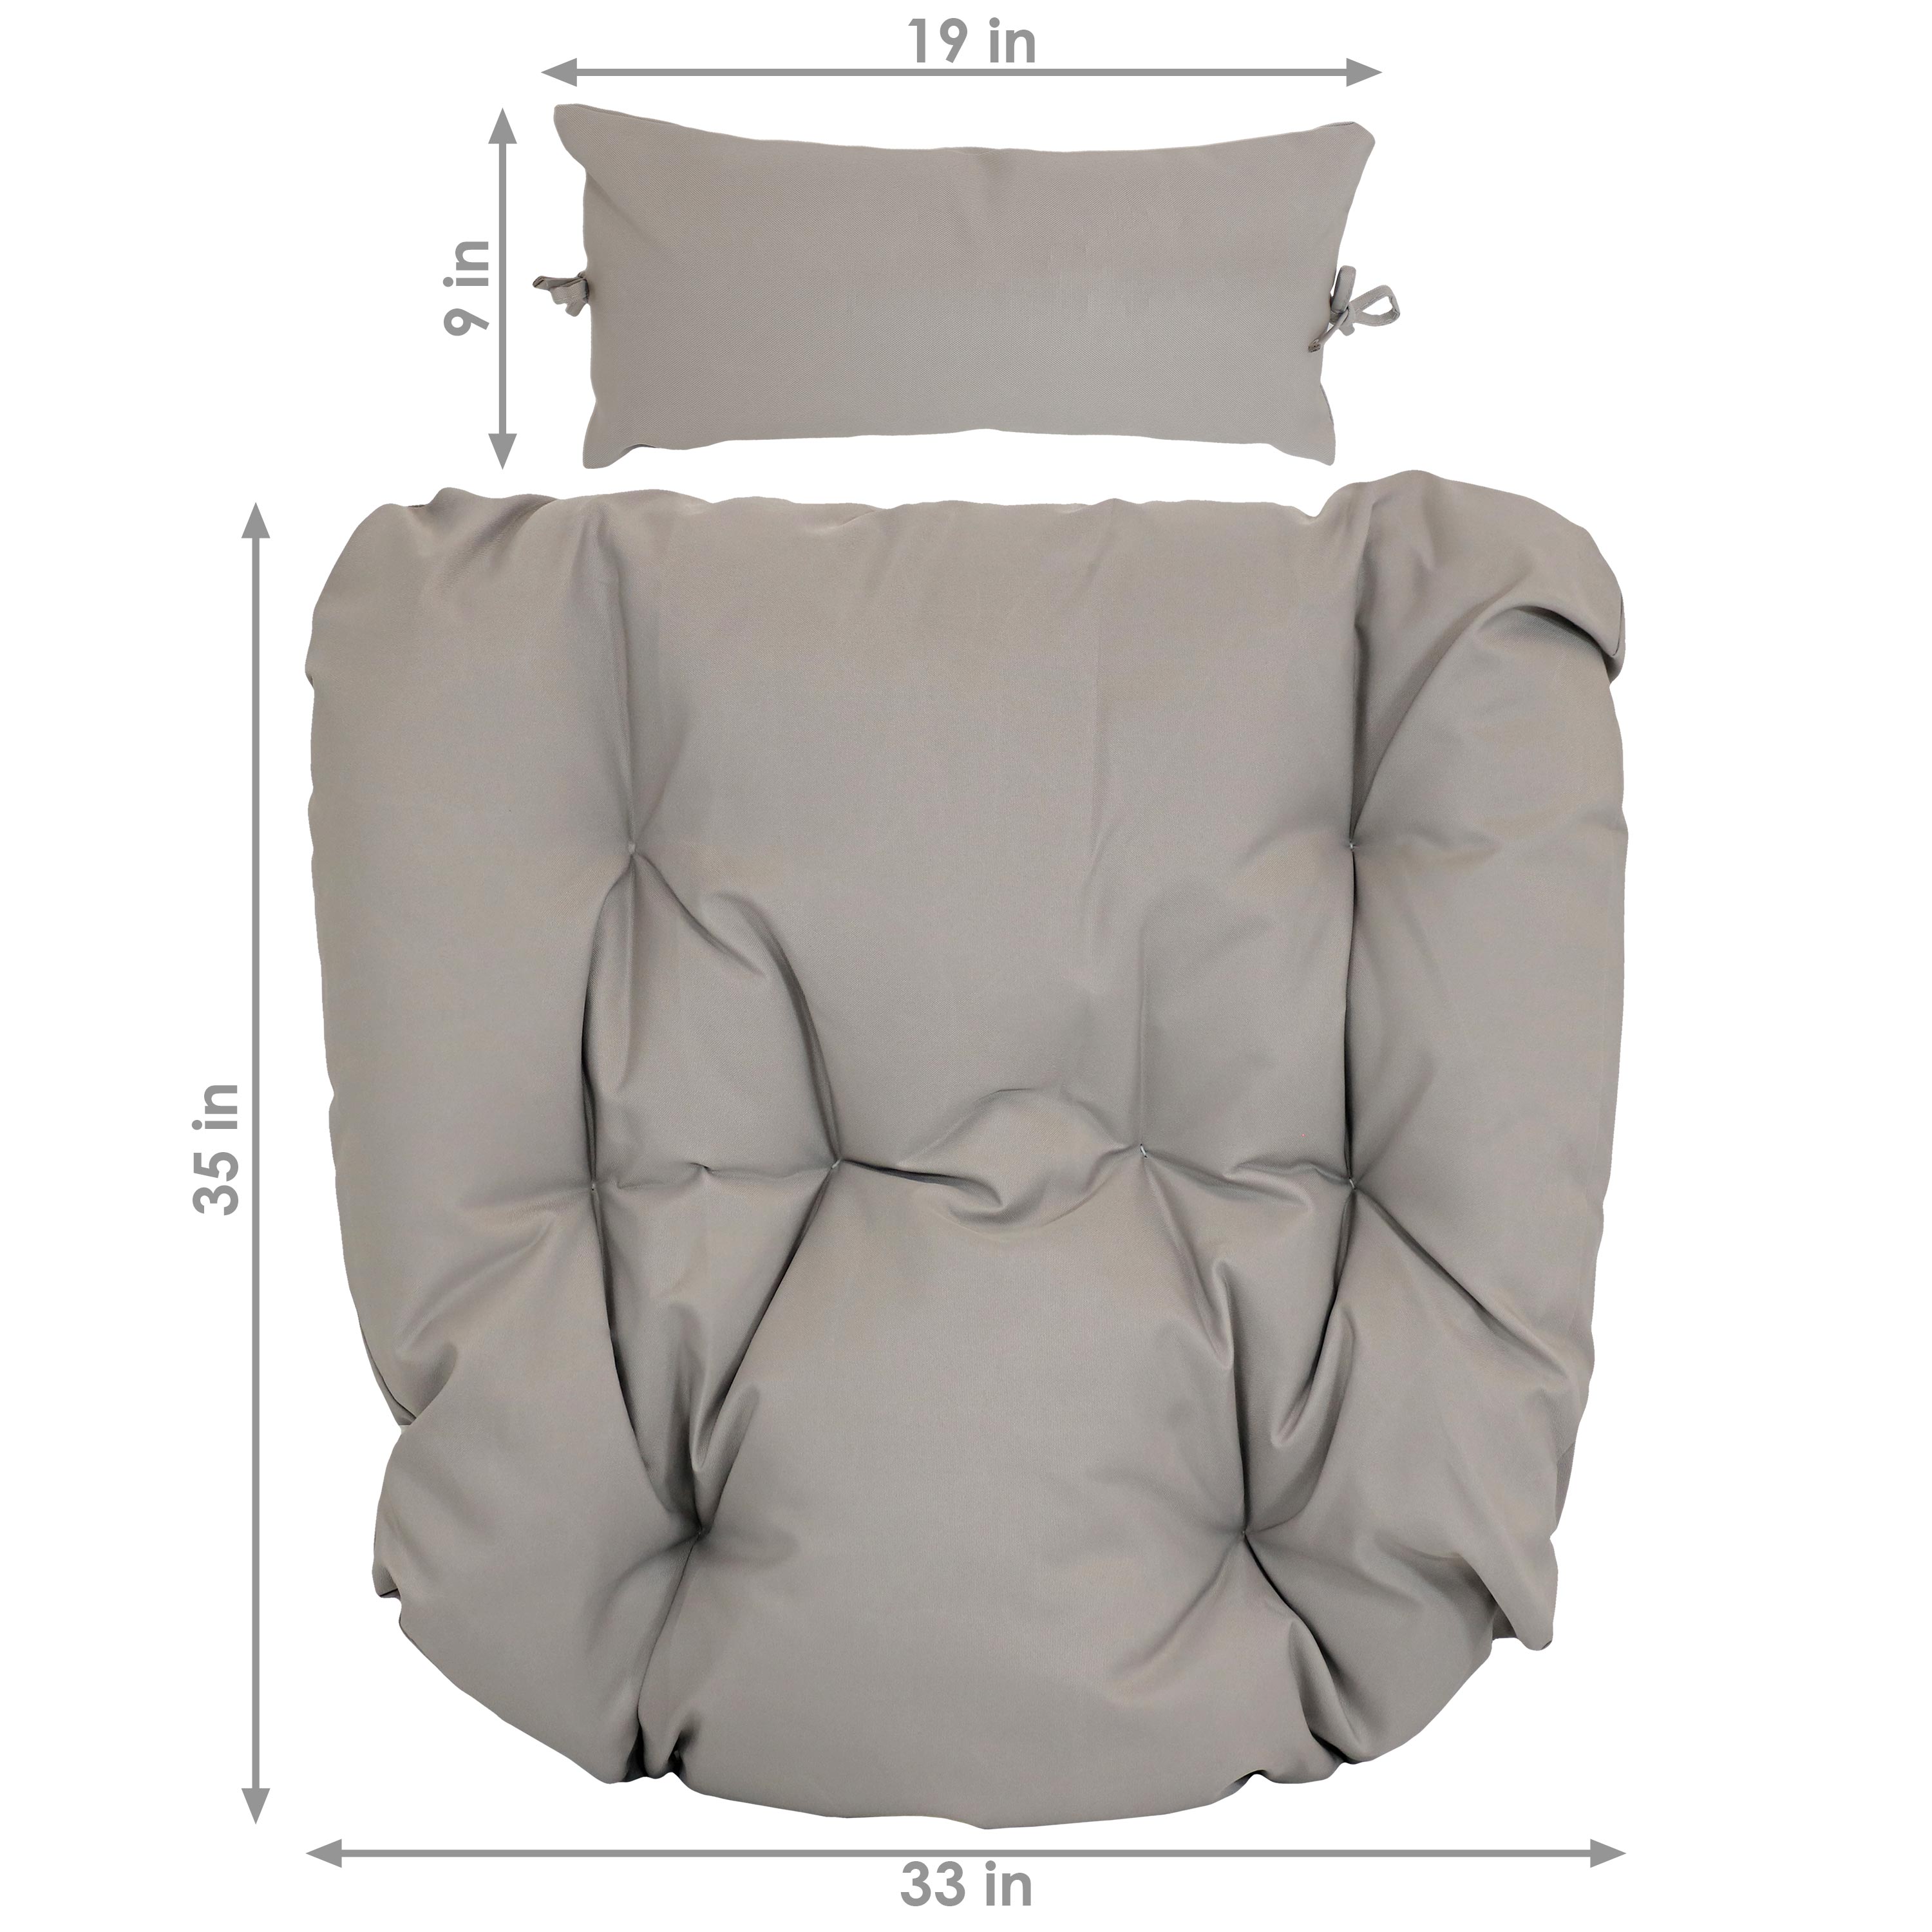 Sunnydaze Replacement Seat Cushion and Headrest Pillow for Caroline Egg Chair - Gray - image 3 of 7